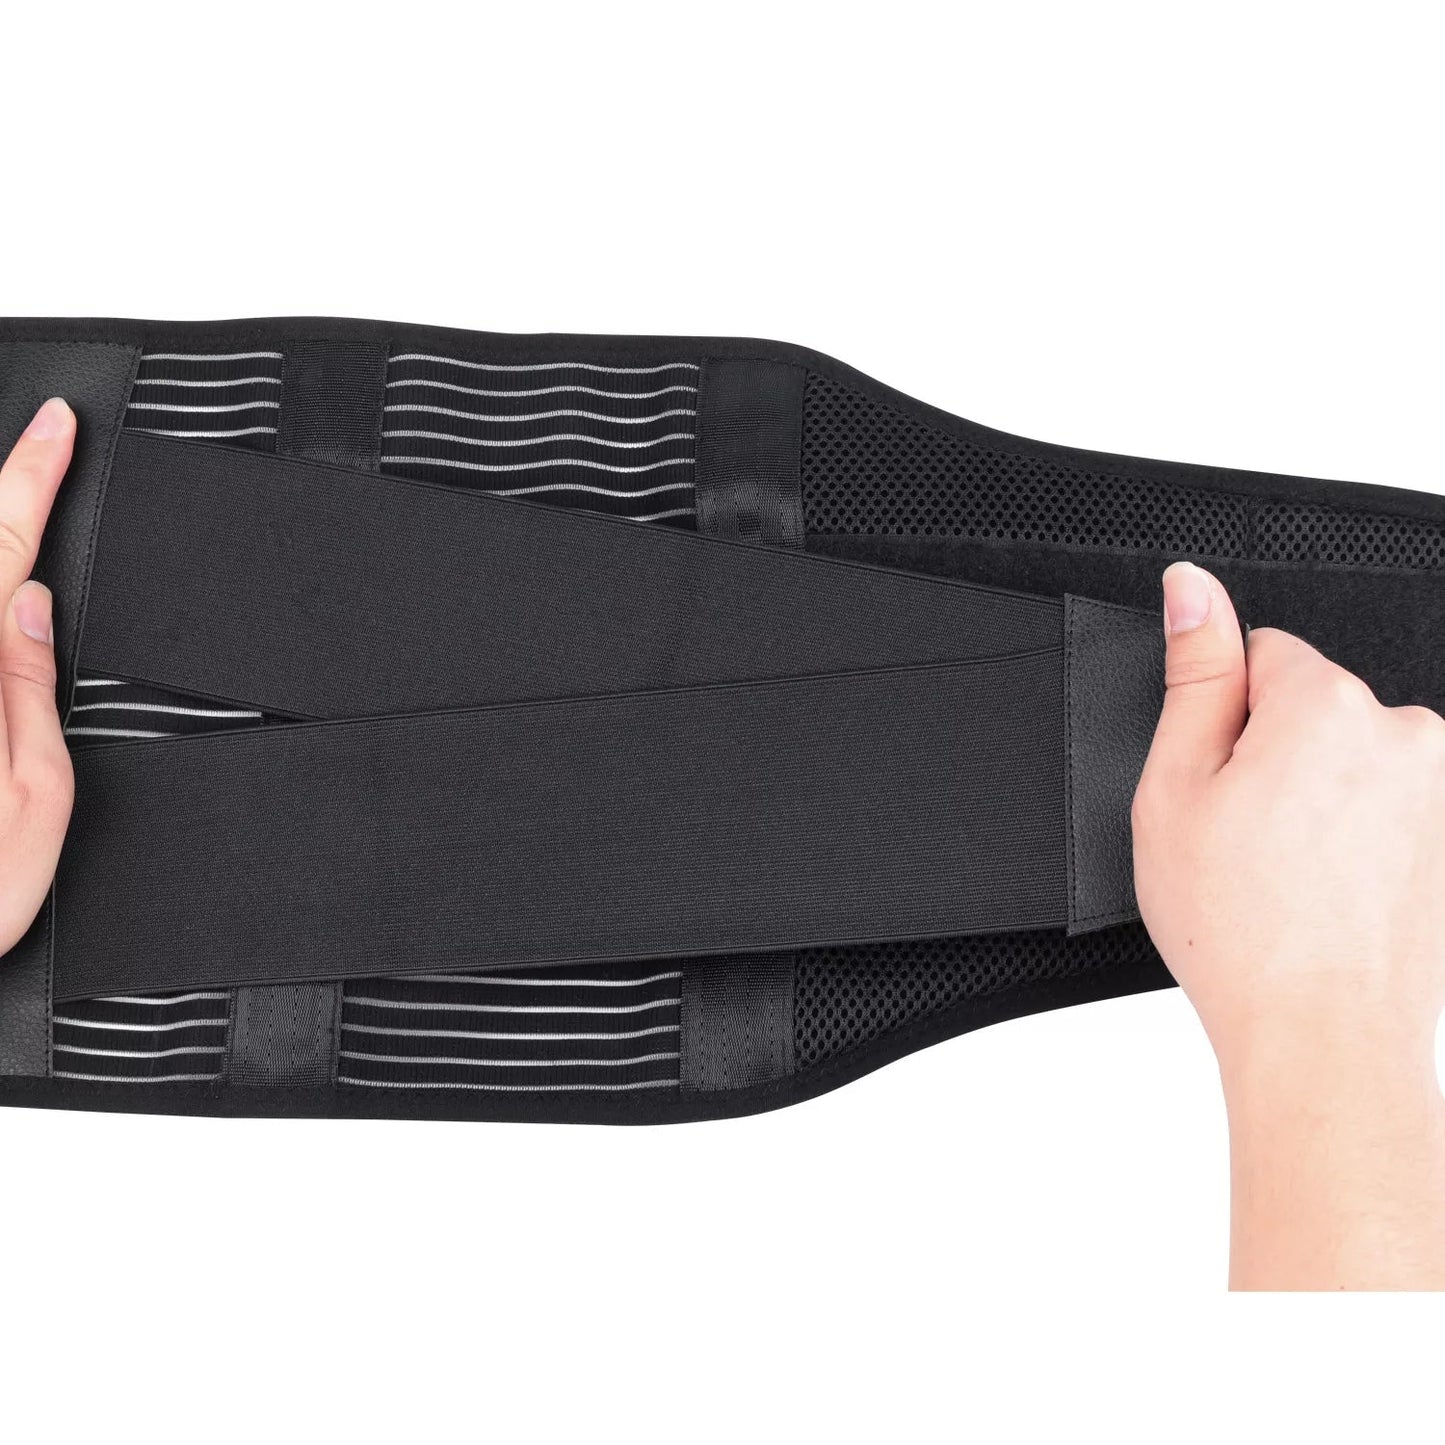 SpineDeck Belt - Lower back pain and Sciatica support